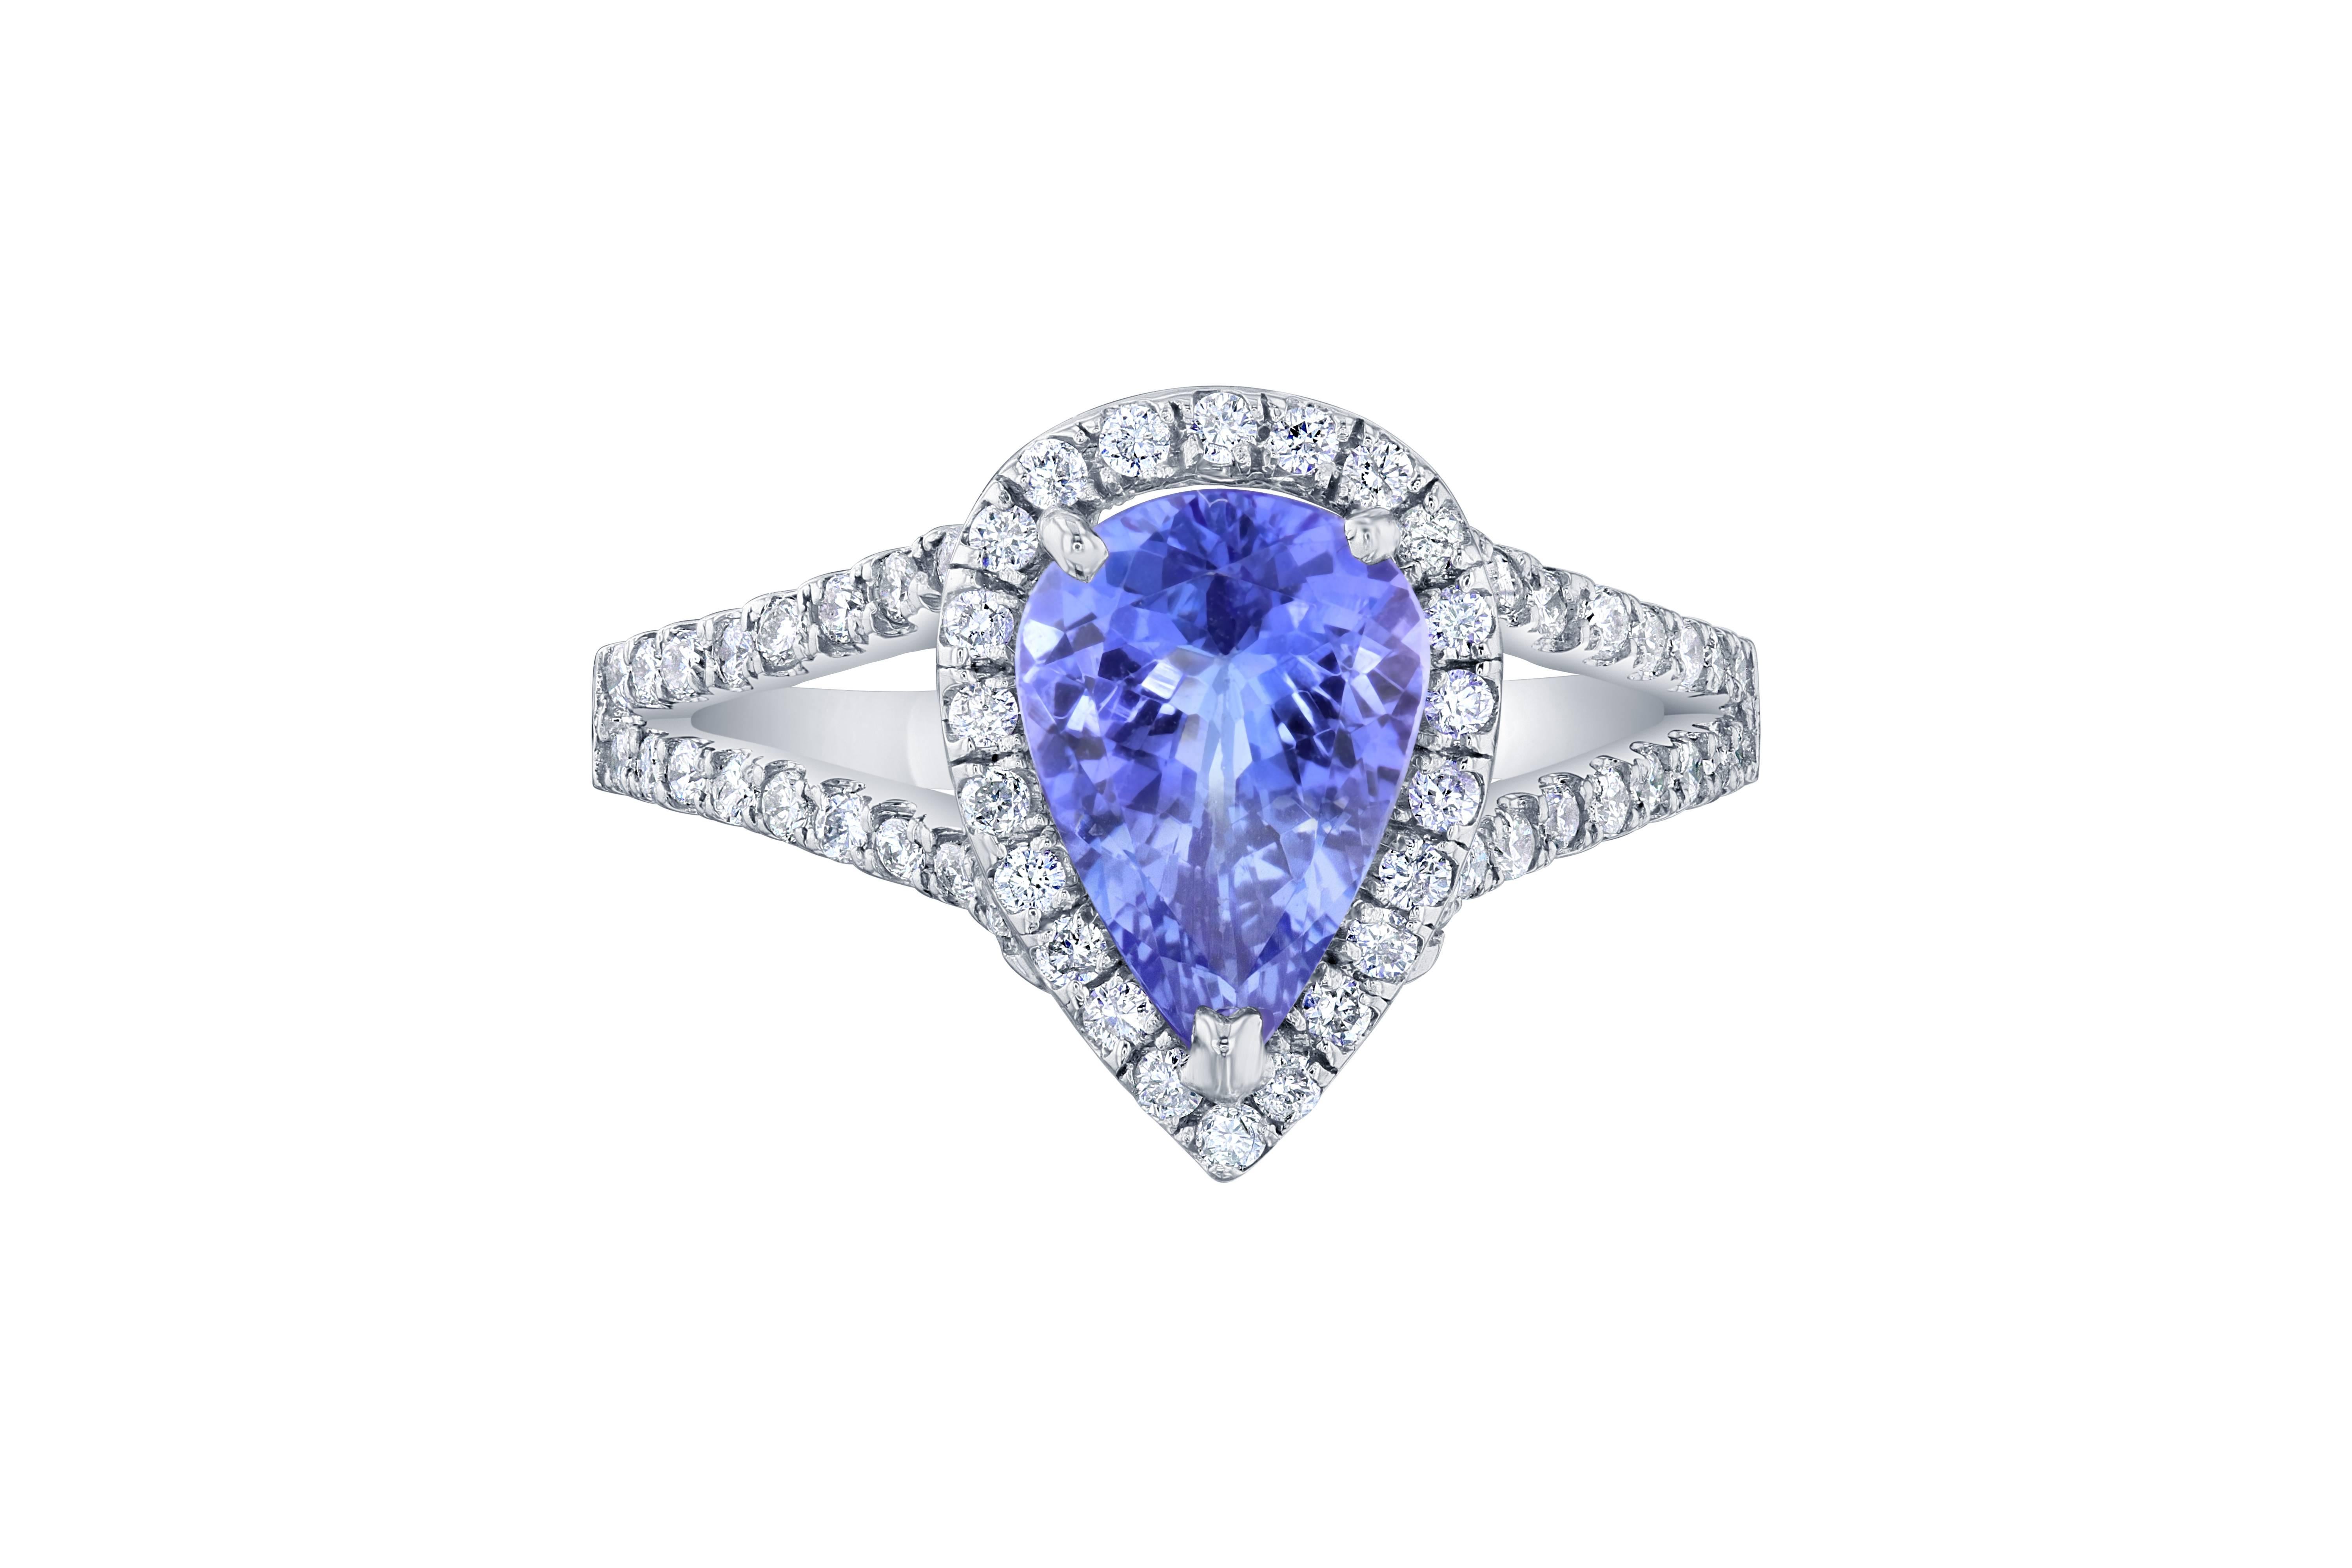 A gorgeous Tanzanite and Diamond ring set in a split shank 14K white gold setting and is approximately 5.3 grams.  The Tanzanite is a Pear cut stone that weighs 1.59 carats.  The ring is surrounded by a halo of 66 Round Brilliant Cut diamonds that